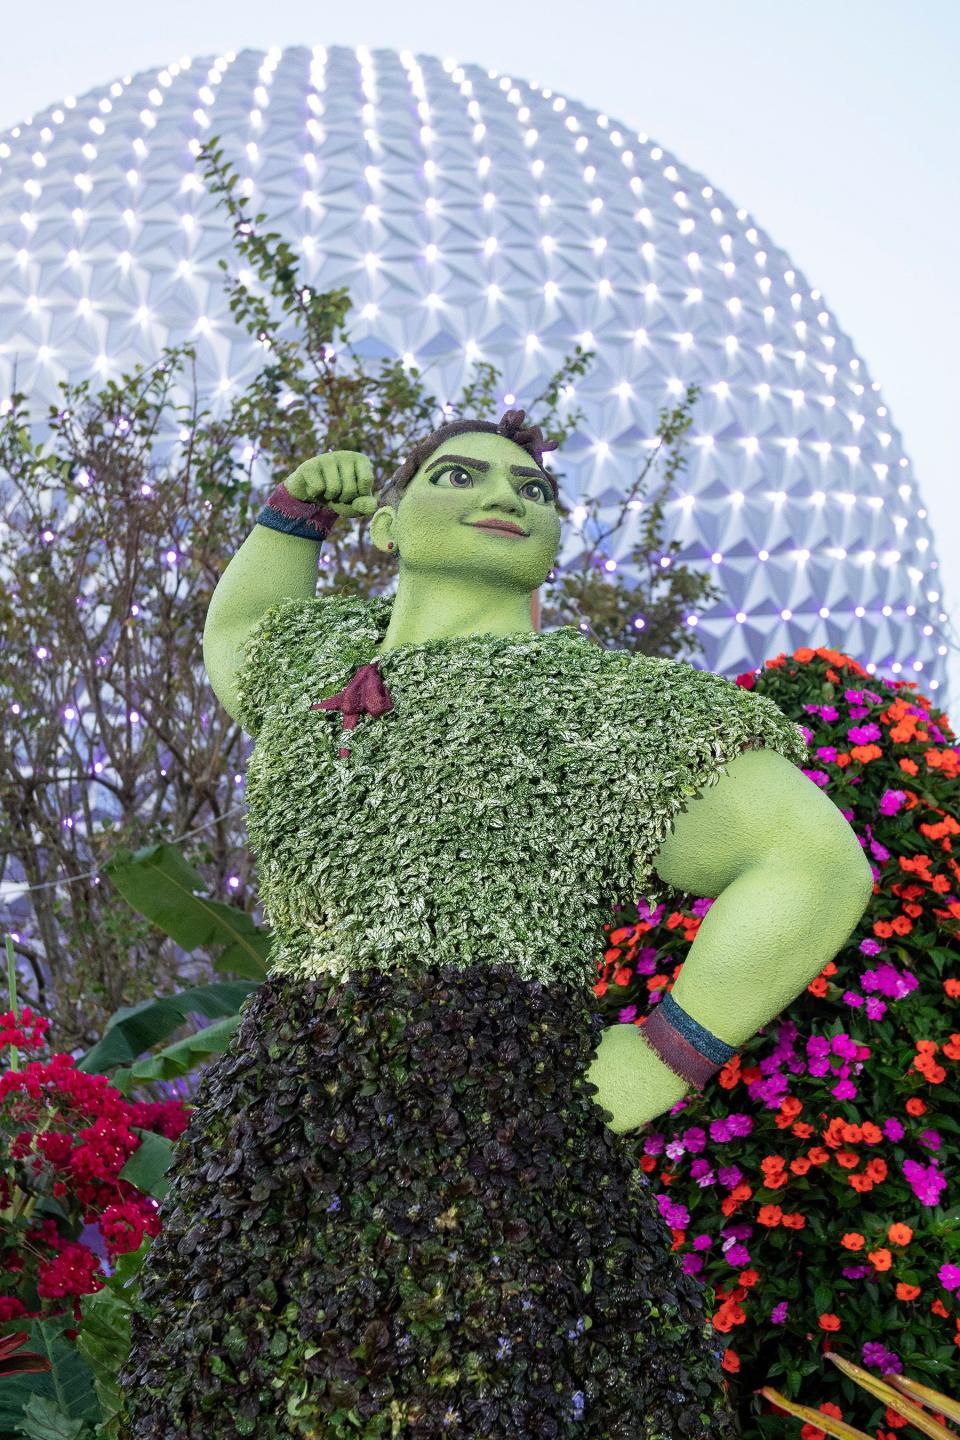 Beginning March 1, guests can enjoy a springtime event filled with enchanting topiaries, brilliant gardens, fresh flavors and lively entertainment at the EPCOT International Flower & Garden Festival. For the first time, innovative topiaries of Mirabel, Antonio, Isabela and Luisa from the Disney animated film “Encanto” will greet guests at the main entrance of EPCOT. (David Roark, photographer)